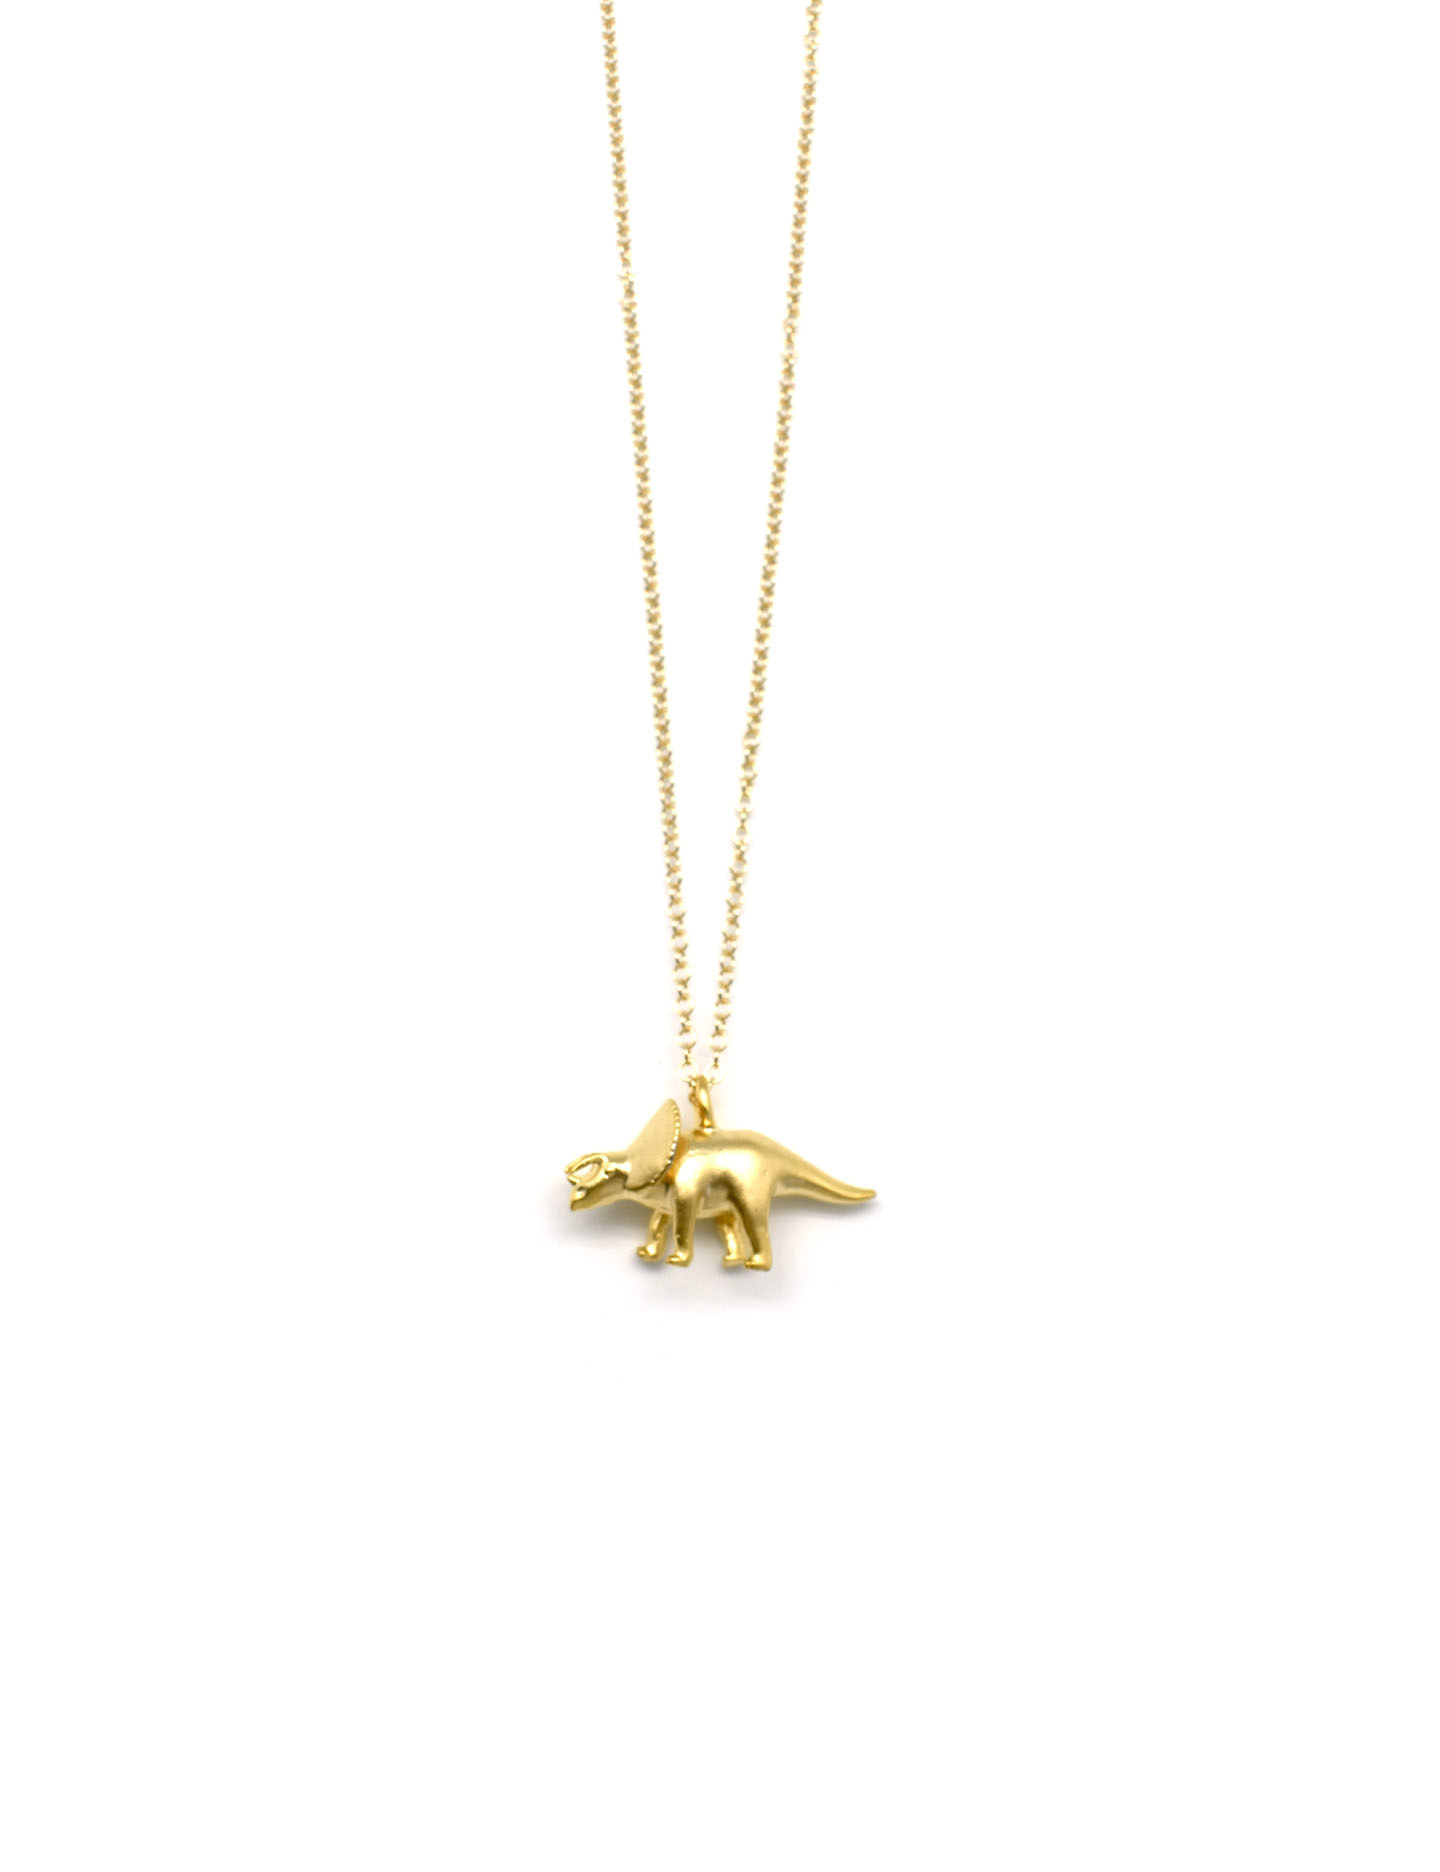 Buy Dinosaur Necklace T-rex Necklace Truck Necklace Dinosaur Gift Online in  India - Etsy